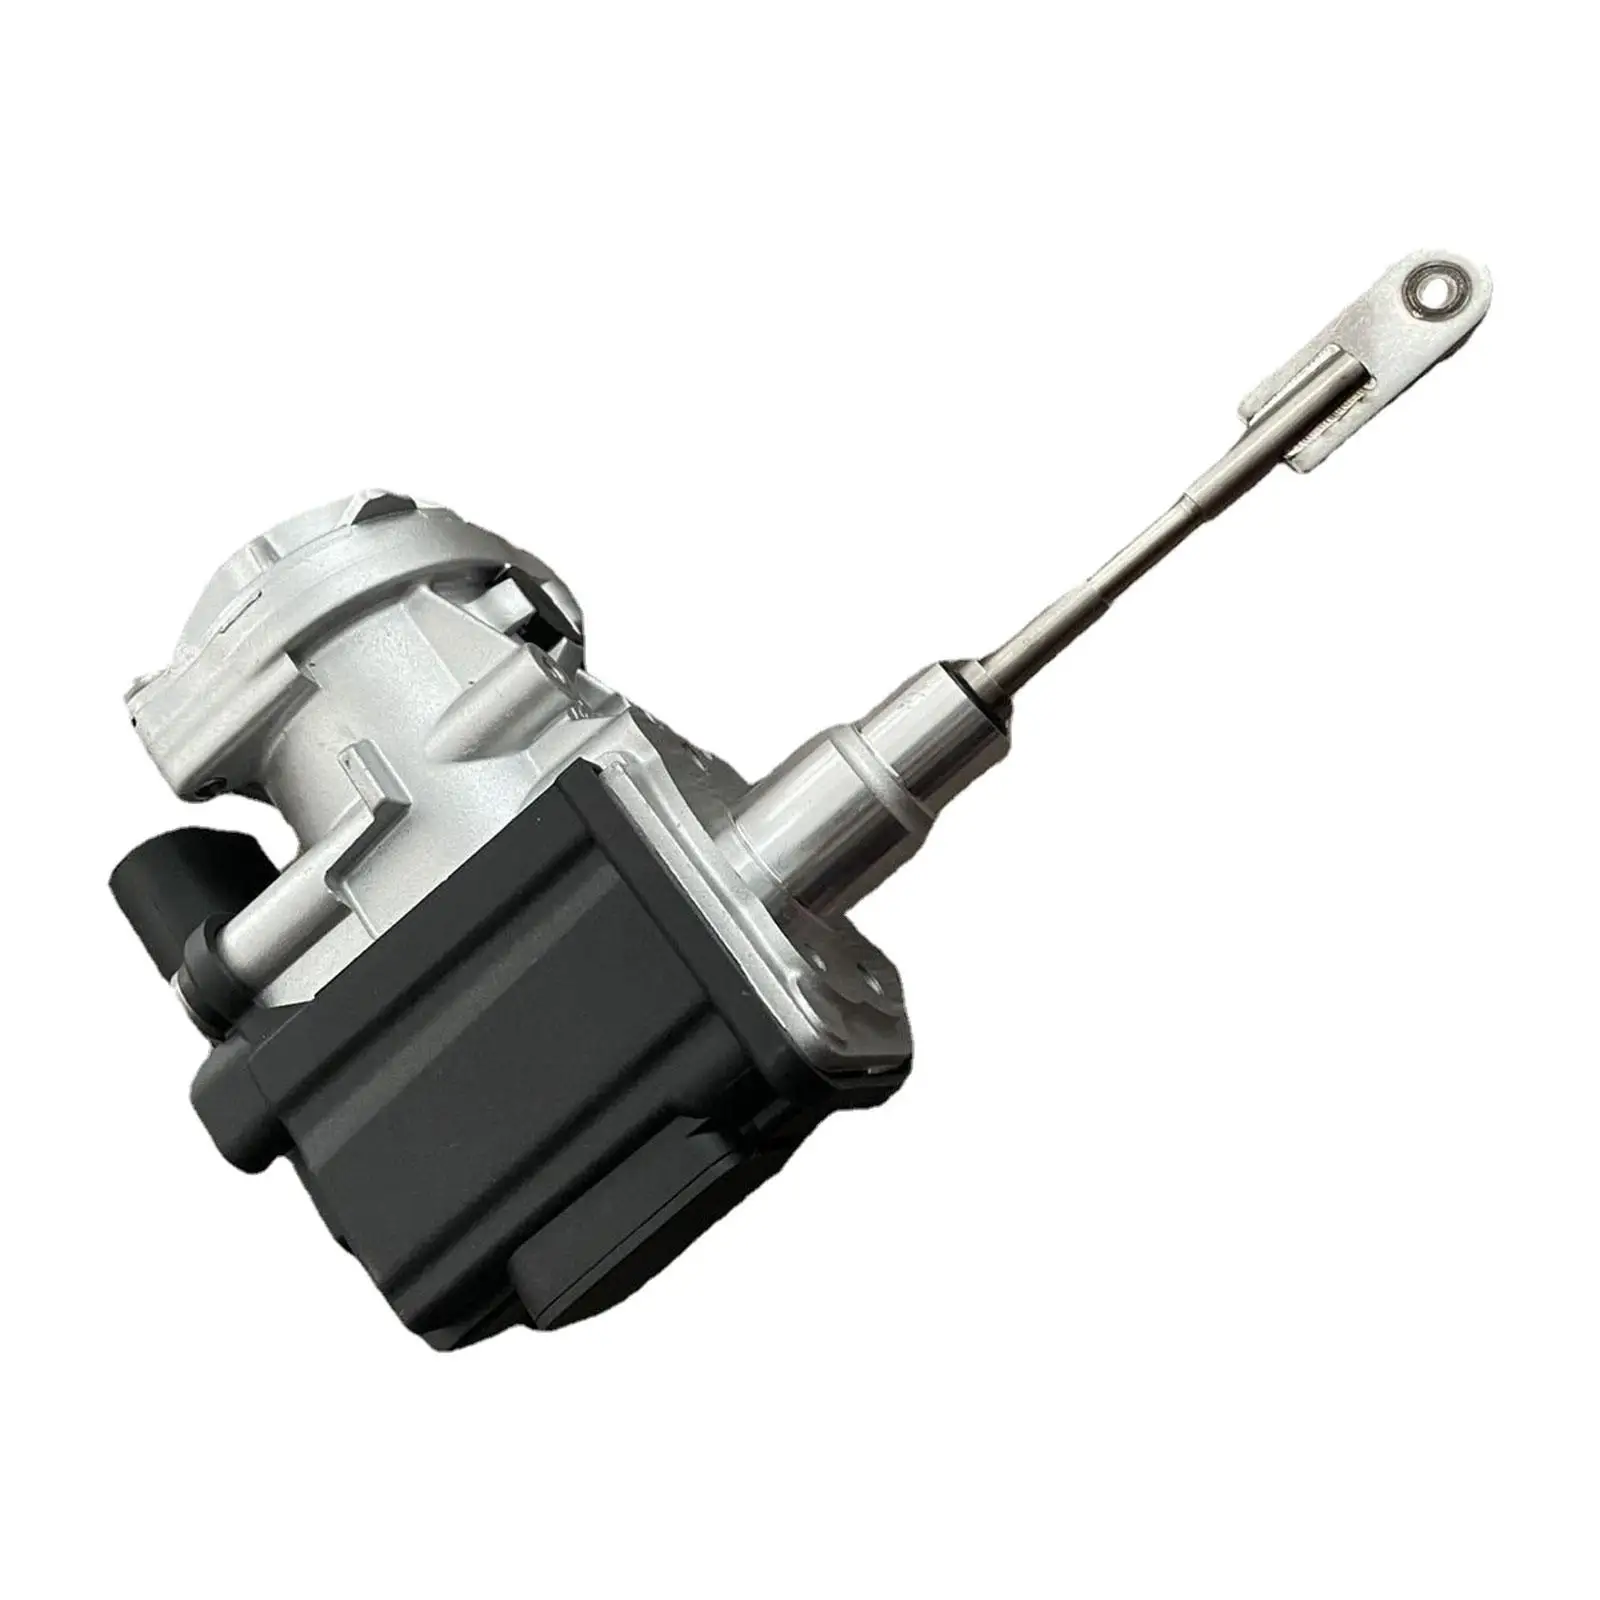 Turbo Actuator Easy to Use High Performance Premium 04E14525Ab for Golf